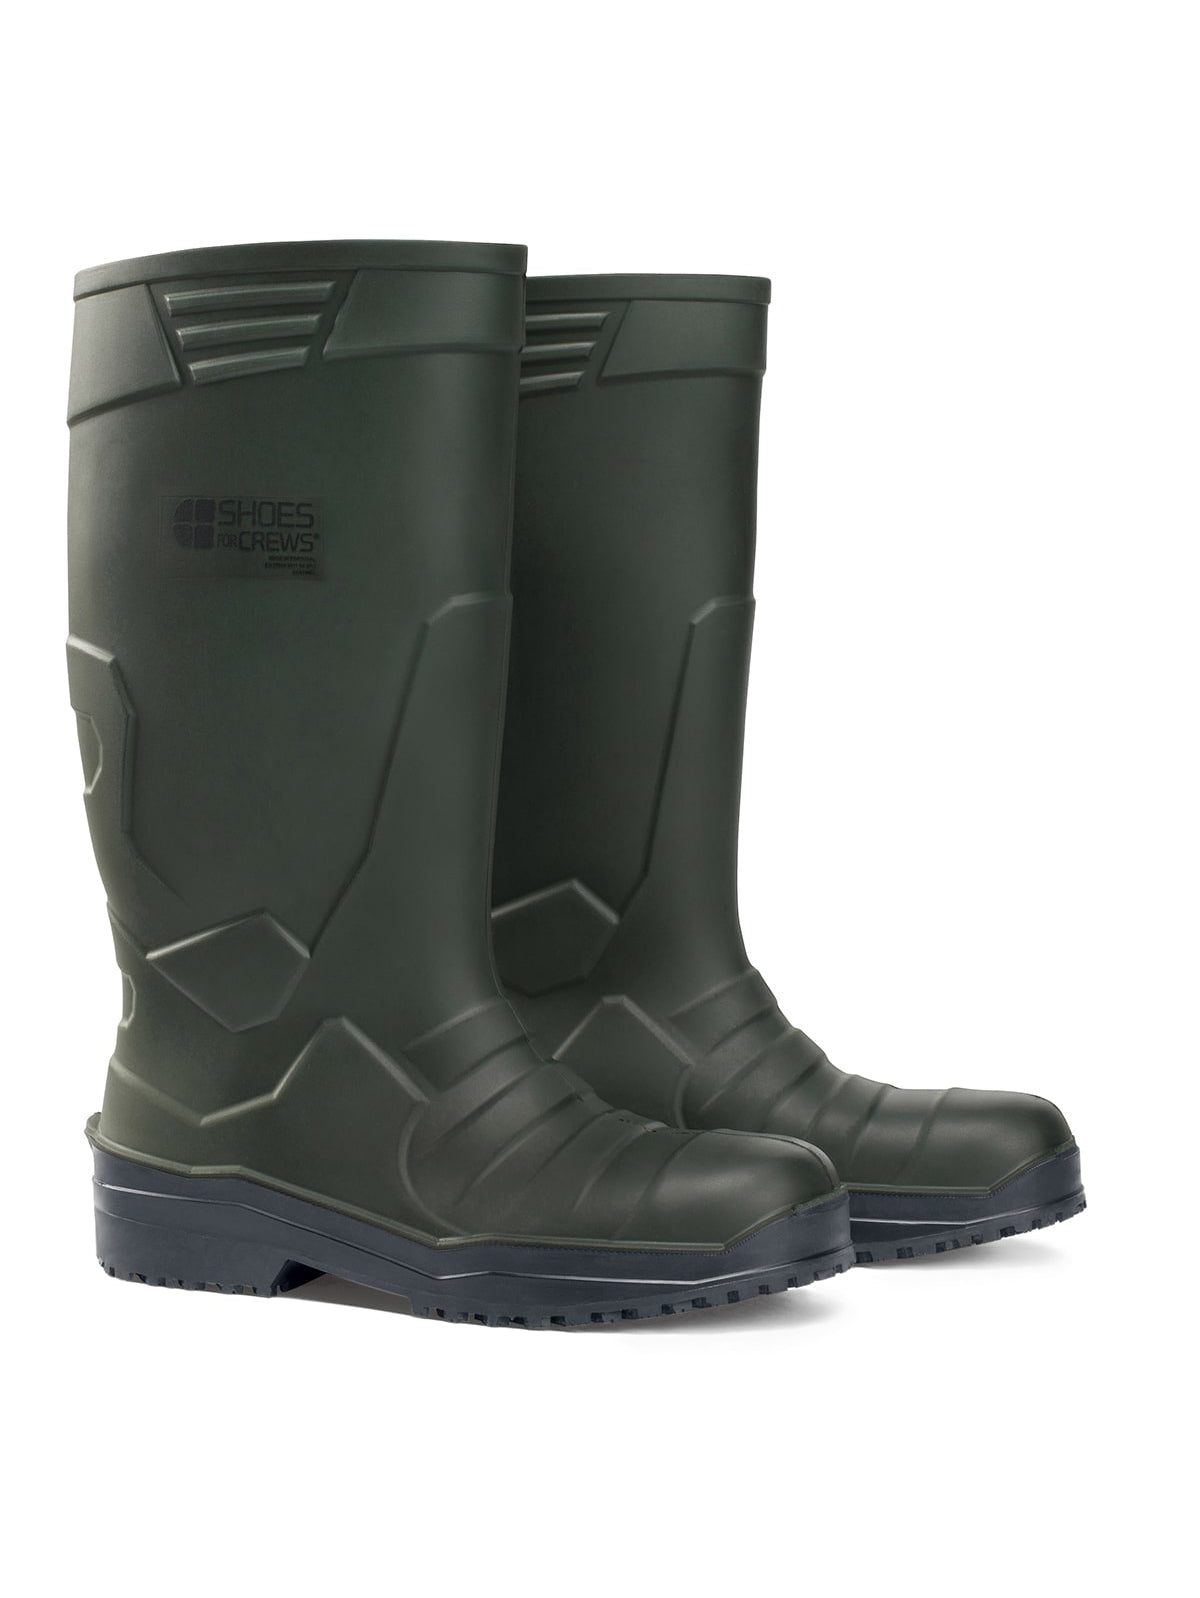 Unisex Safety Boot Sentinel Green (S4) by  Shoes For Crews.